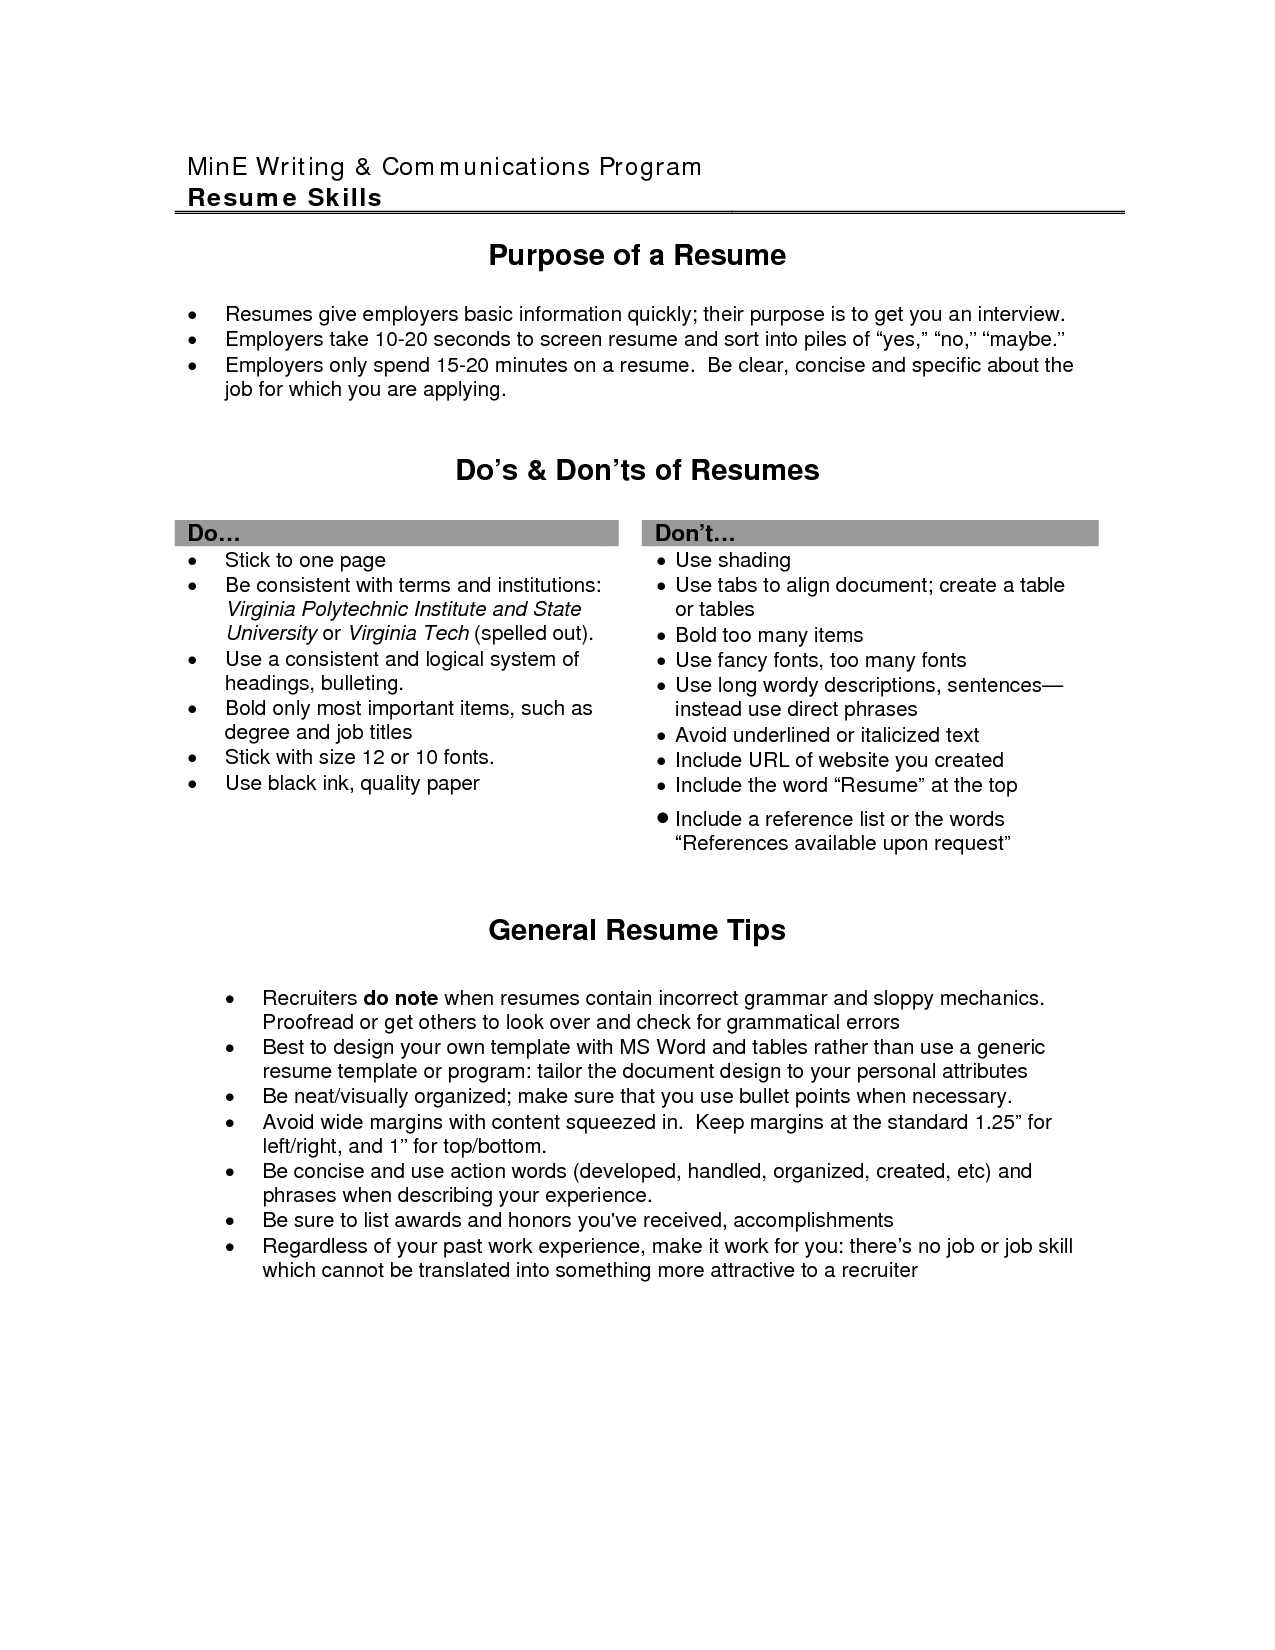 Good Objective For Resume Writing A Great Objective For Resume Good Objective Resume Yeni Mescale Objectives Resumes Your Outline Free Examples Blank Template Wizard Nice Effective Layout Professiona good objective for resume|wikiresume.com